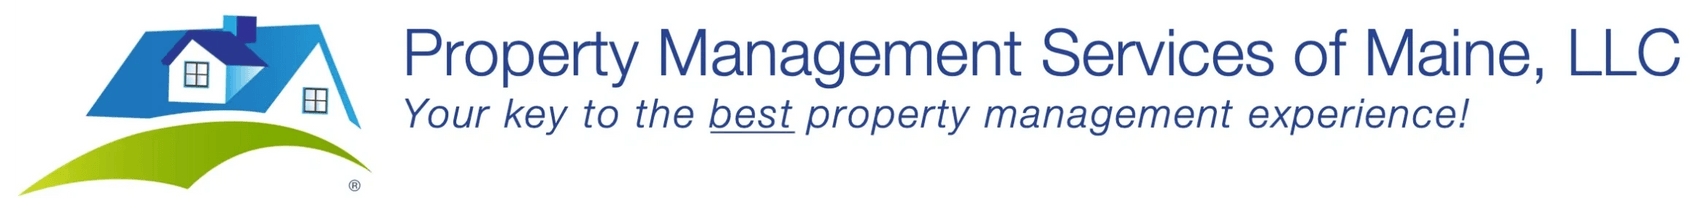 Property Management Services of Maine